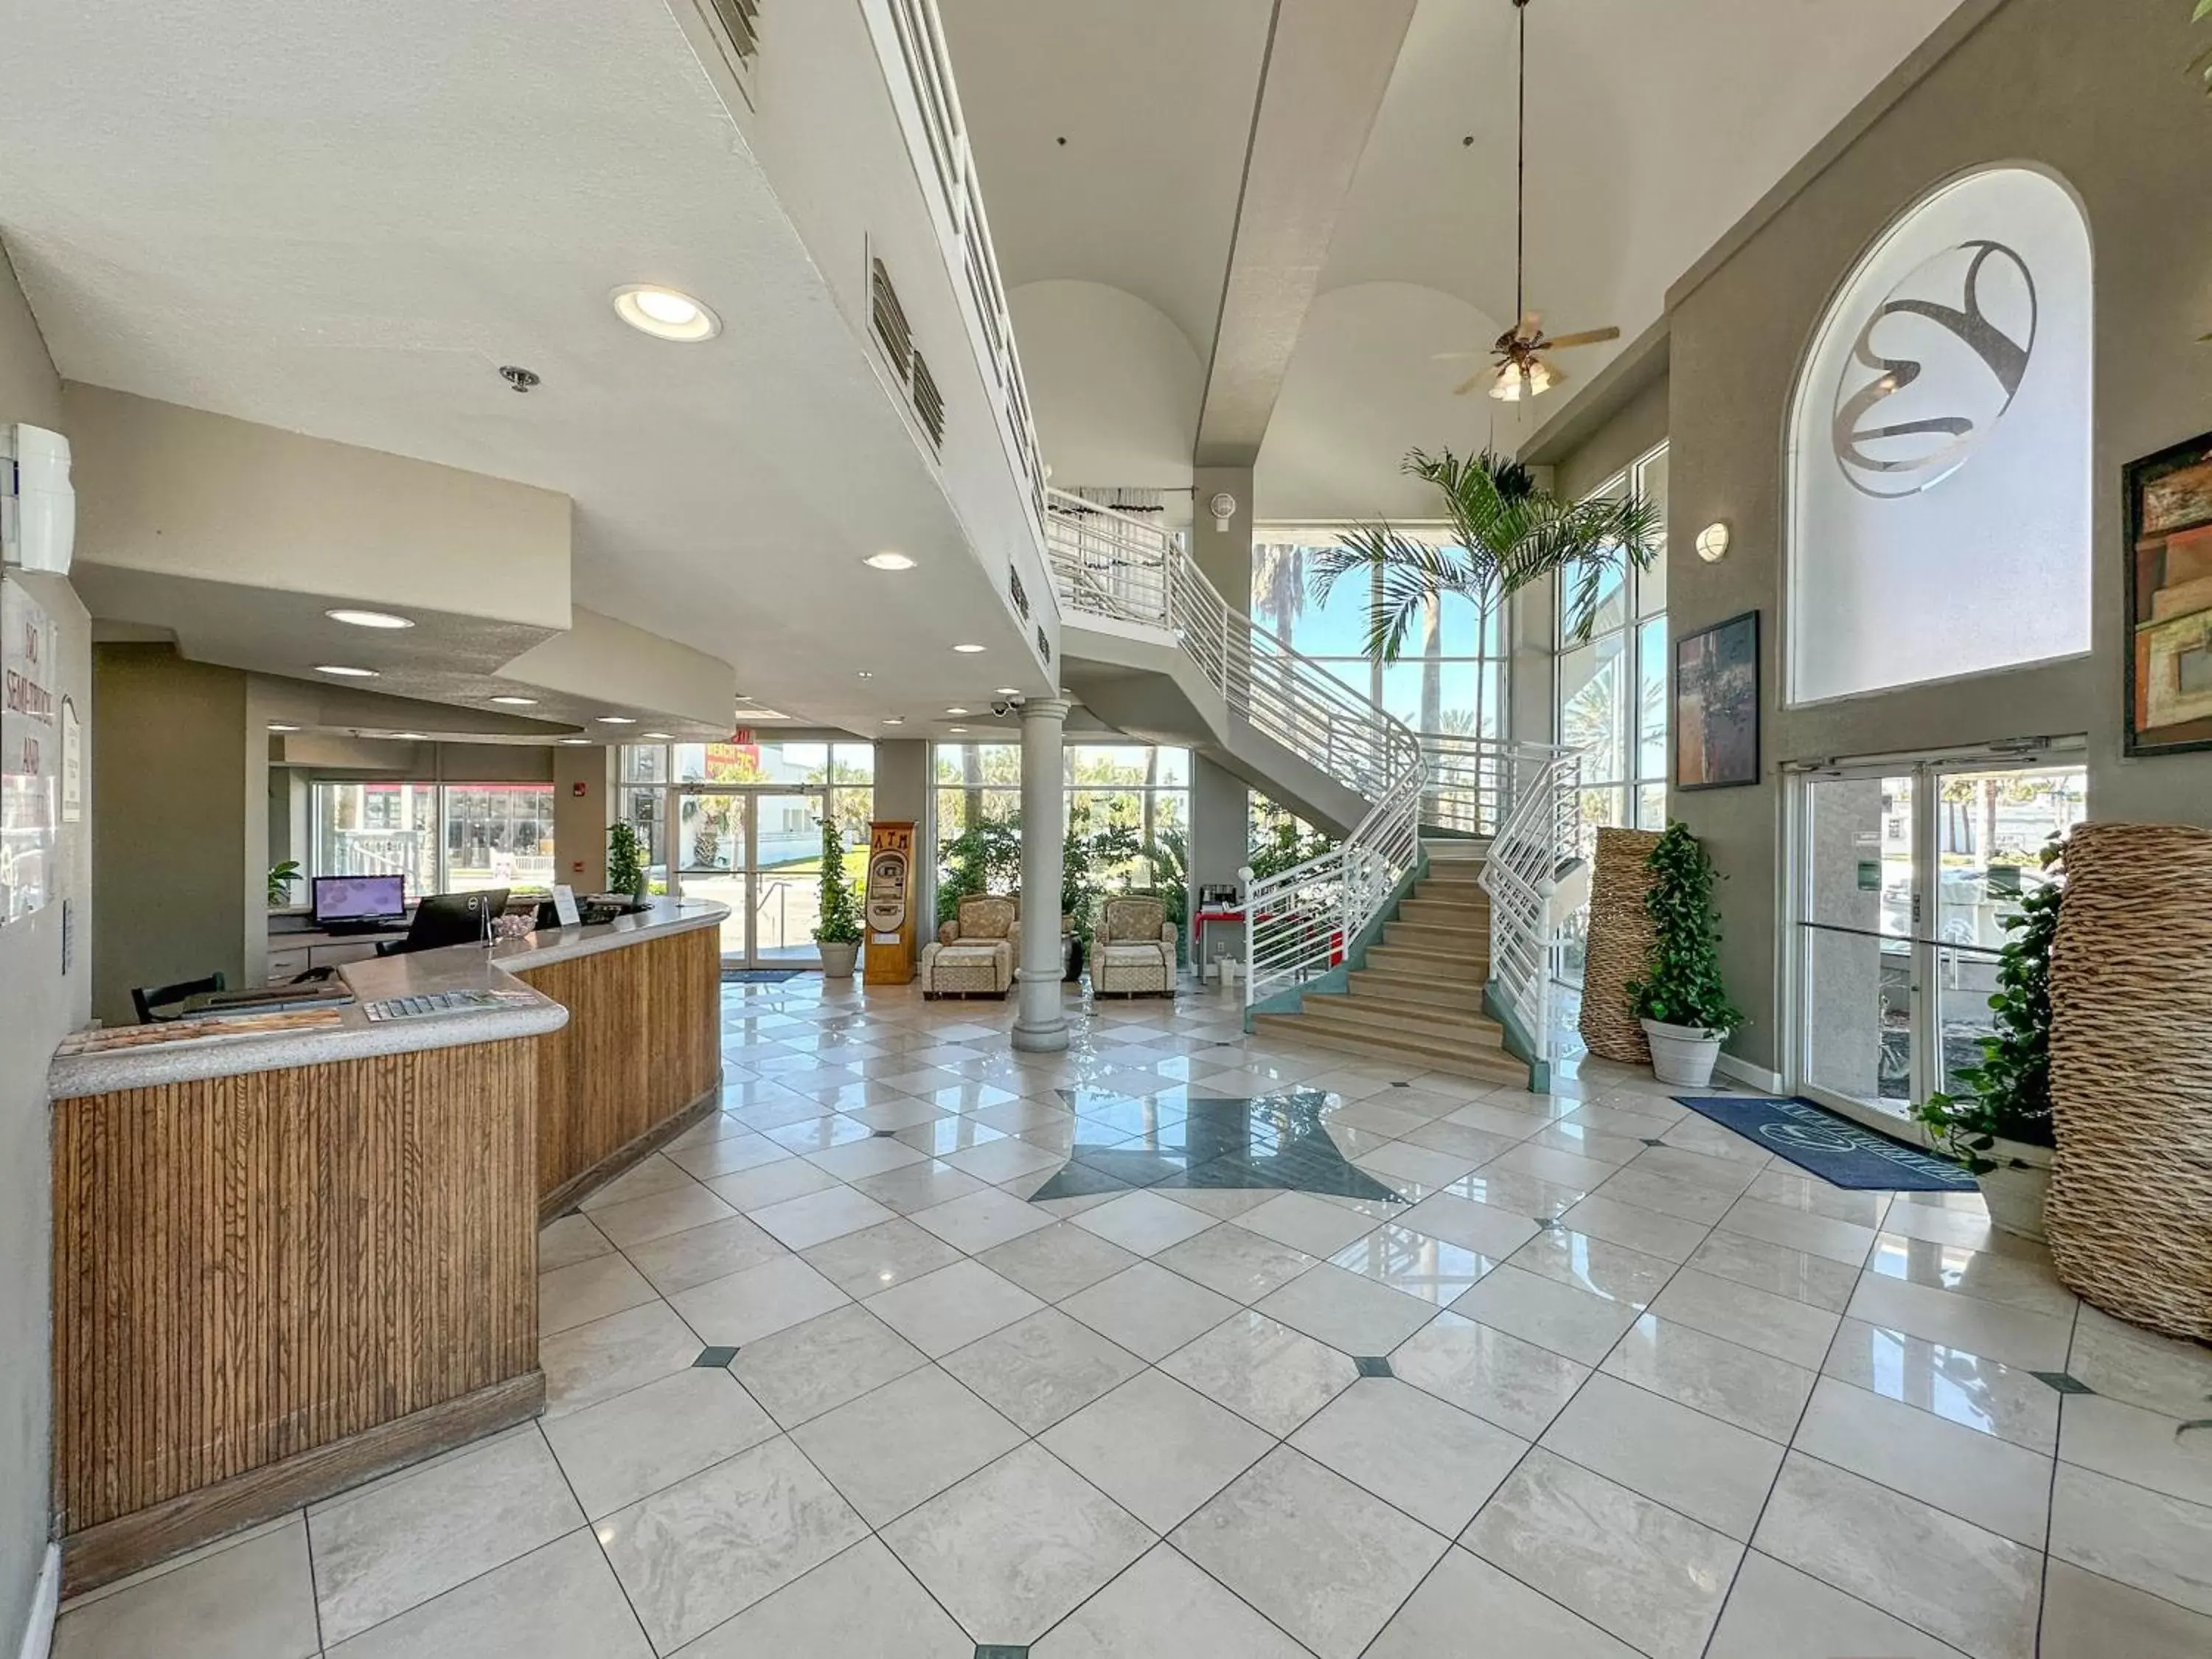 Lobby/Reception in Boardwalk Inn and Suites